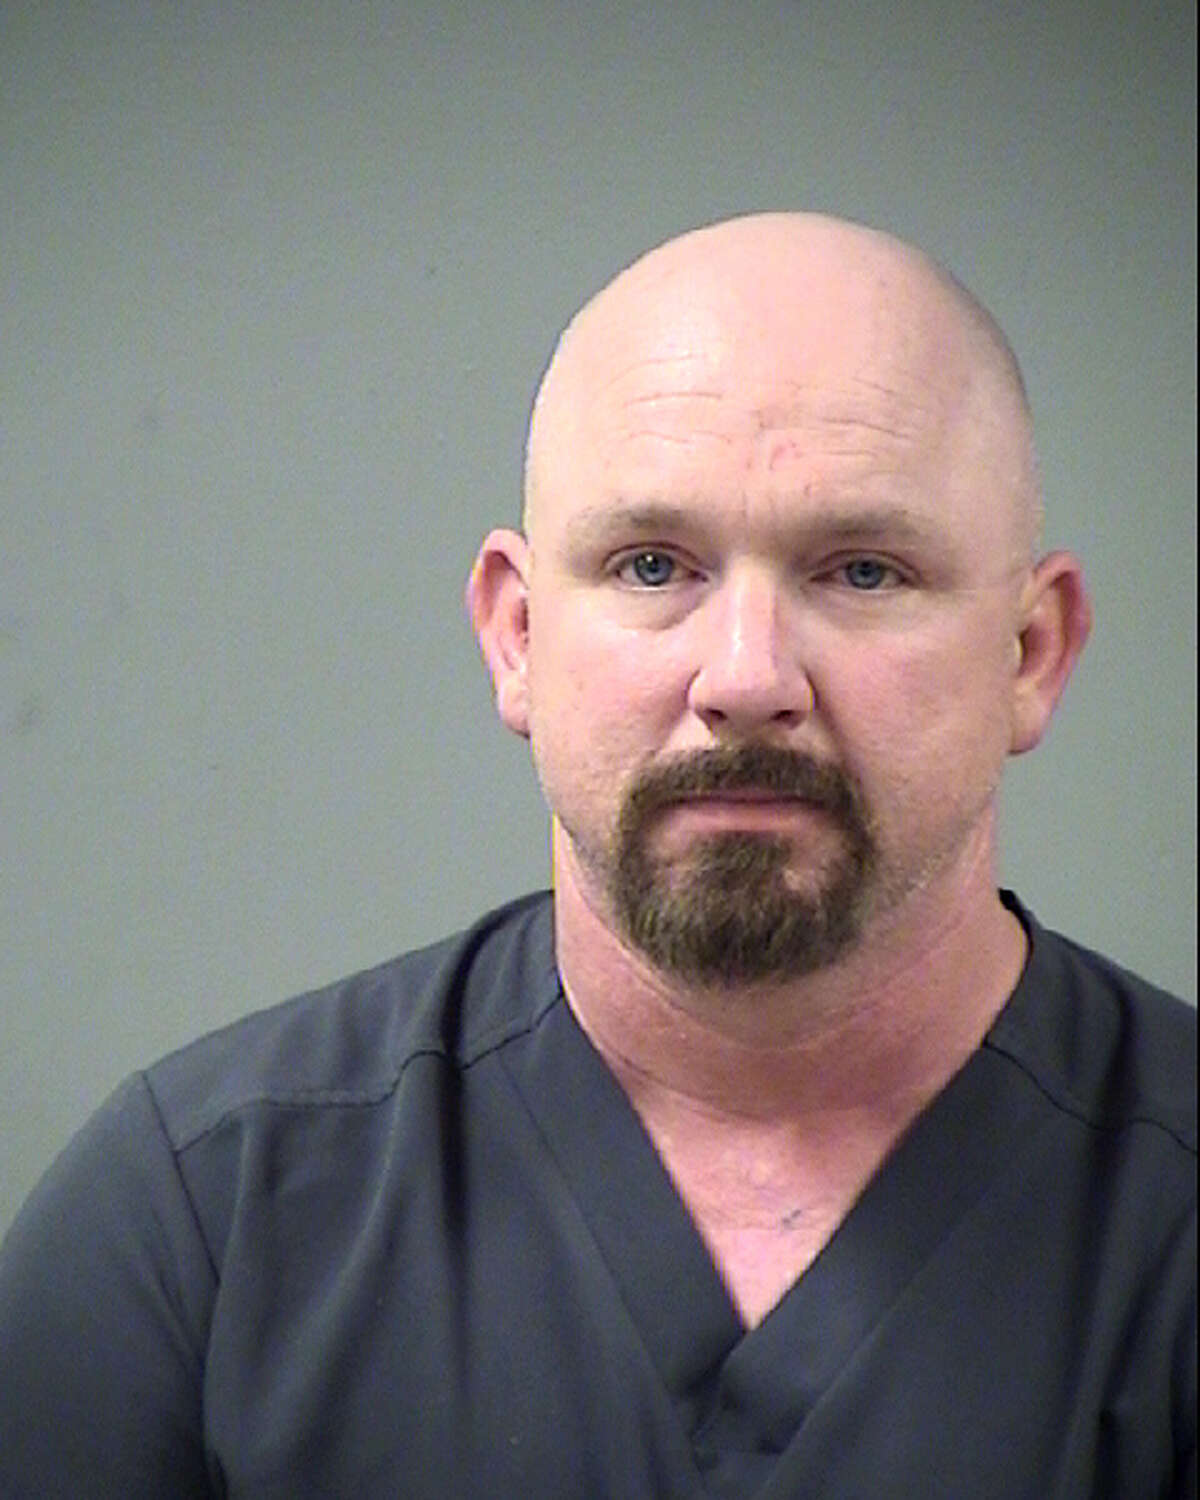 Jack Miller, 45, faces a charge of interference with public duties.